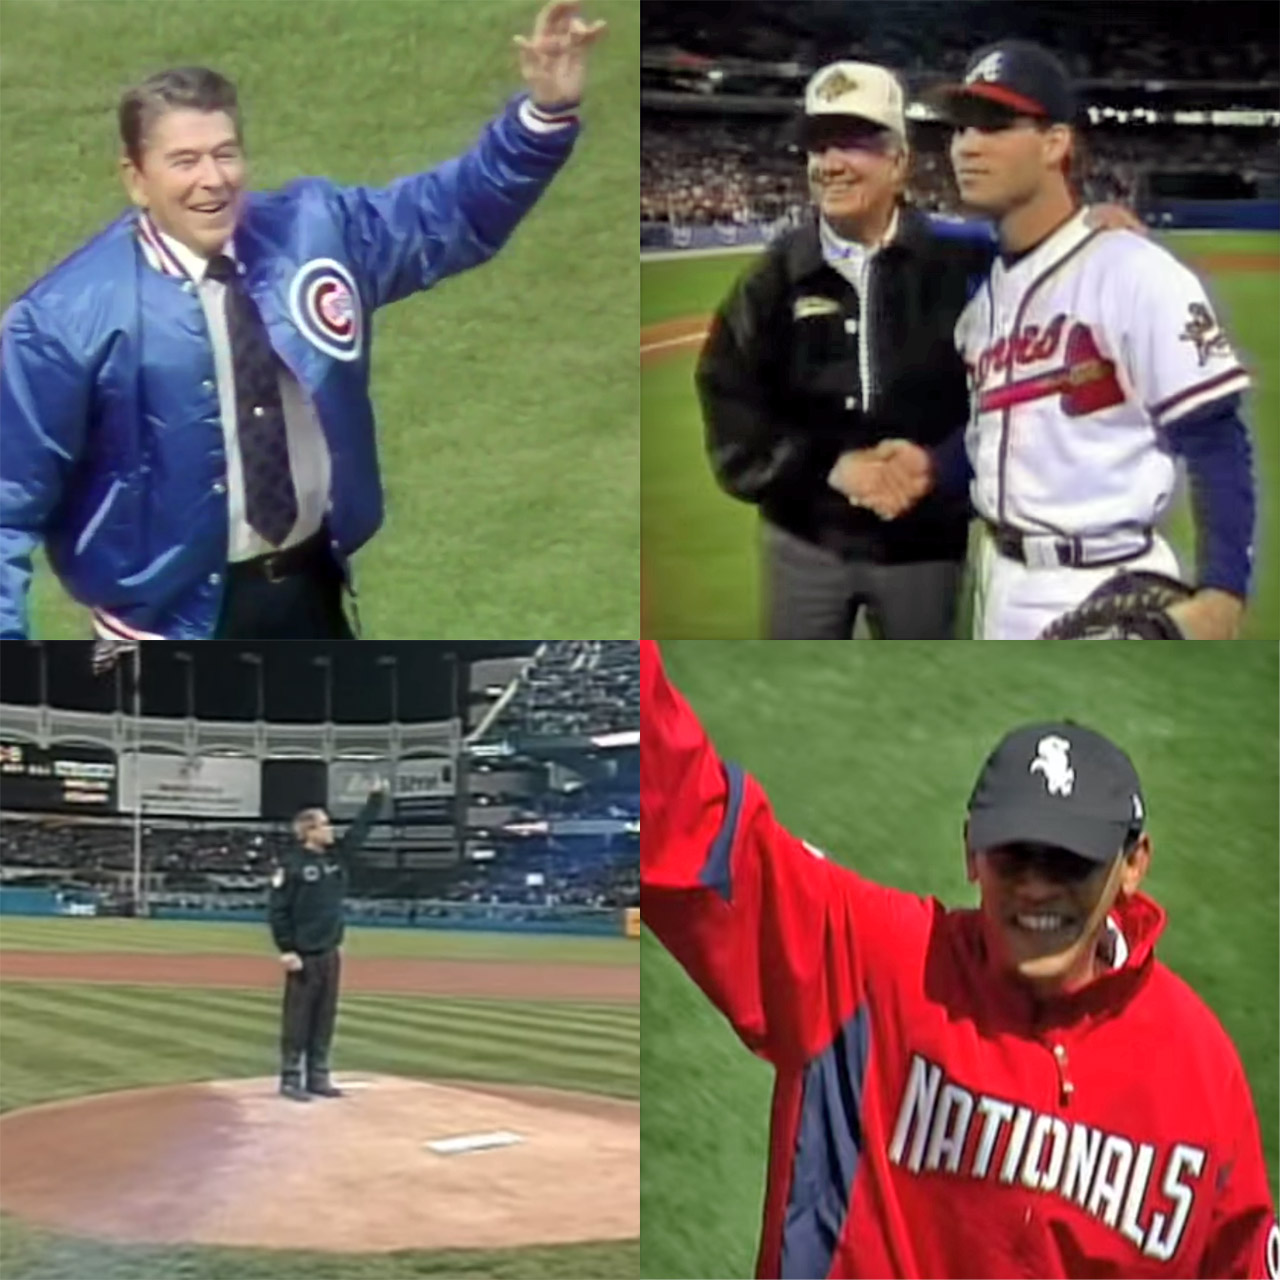 First pitches with Ronald Reagan, Jimmy Carter, George Bush and Barack Obama